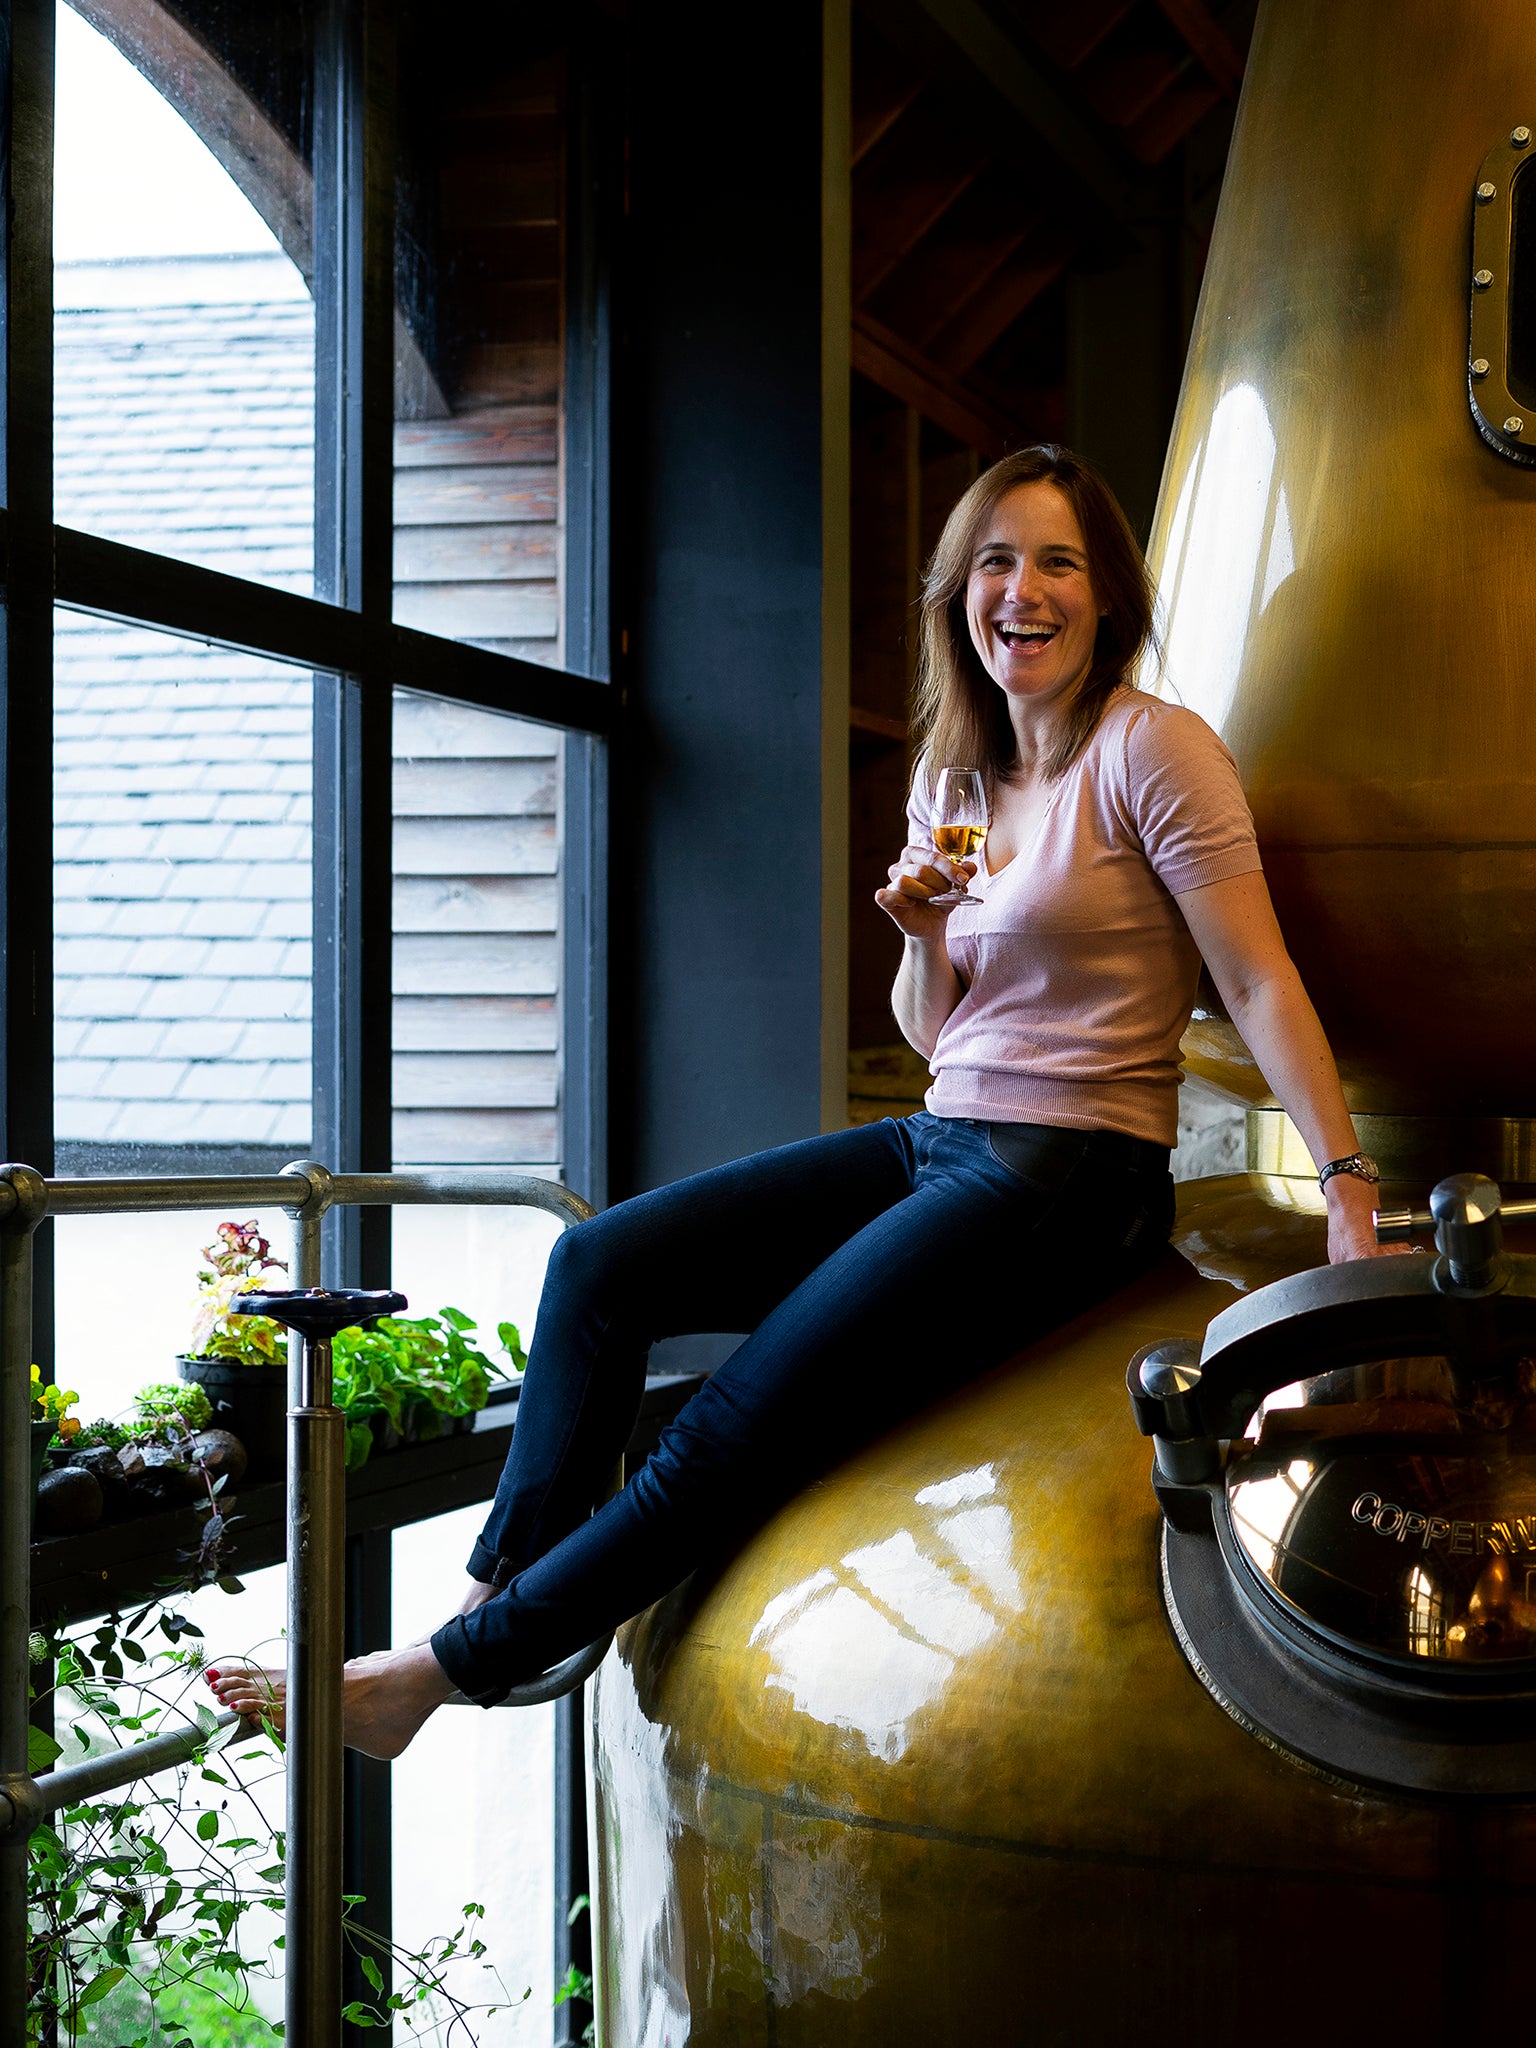 Founder Annabel Thomas built the distillery from scratch